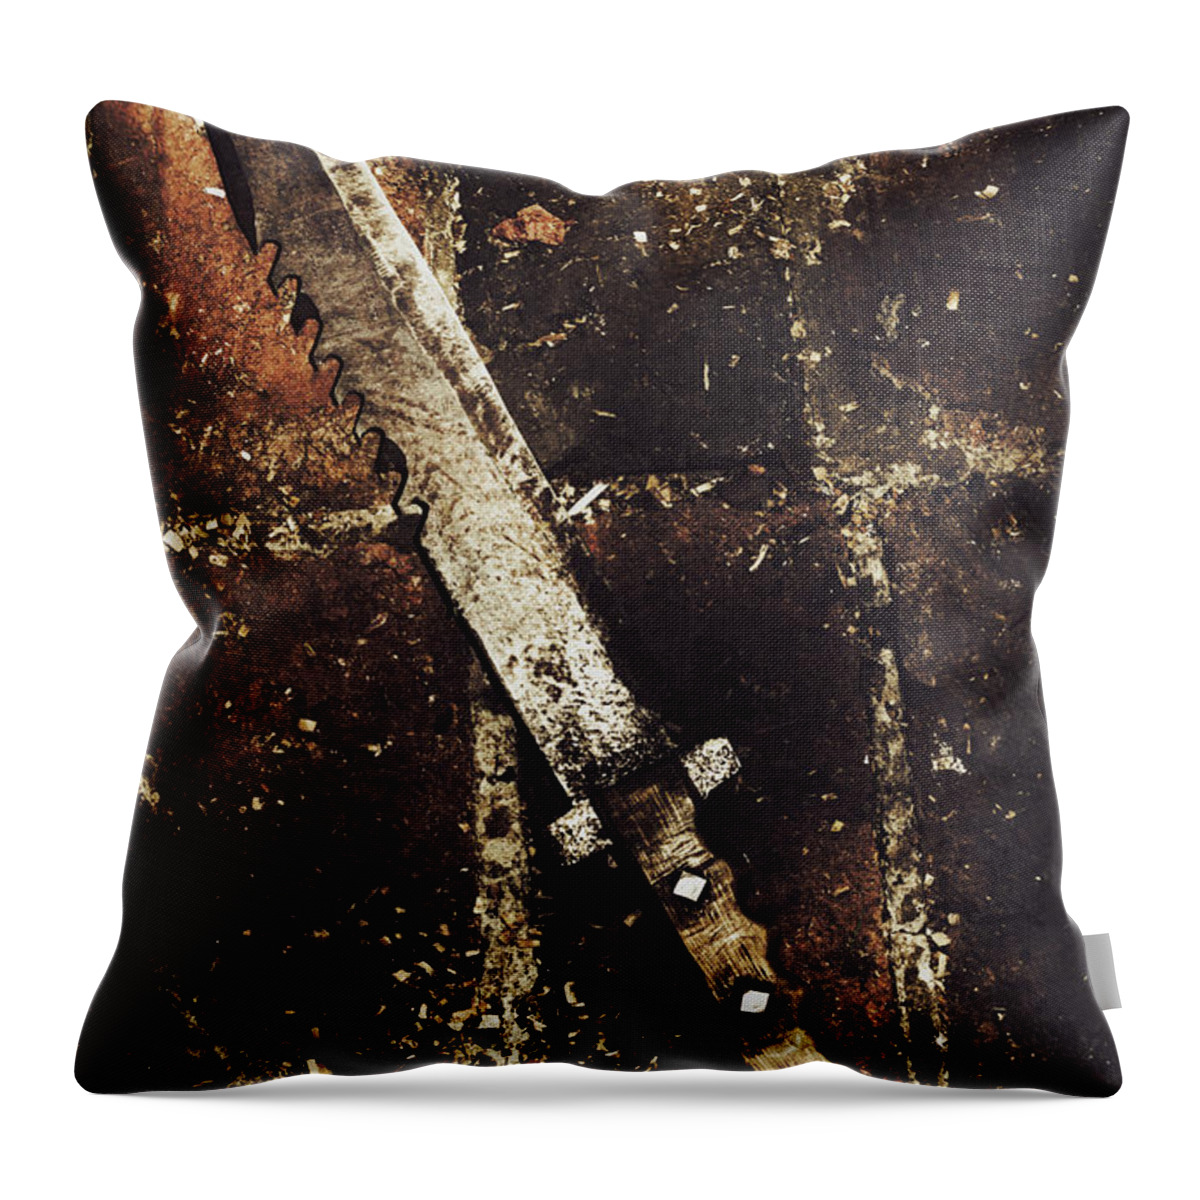 Medieval Throw Pillow featuring the photograph Medieval blacksmith sword by Jorgo Photography